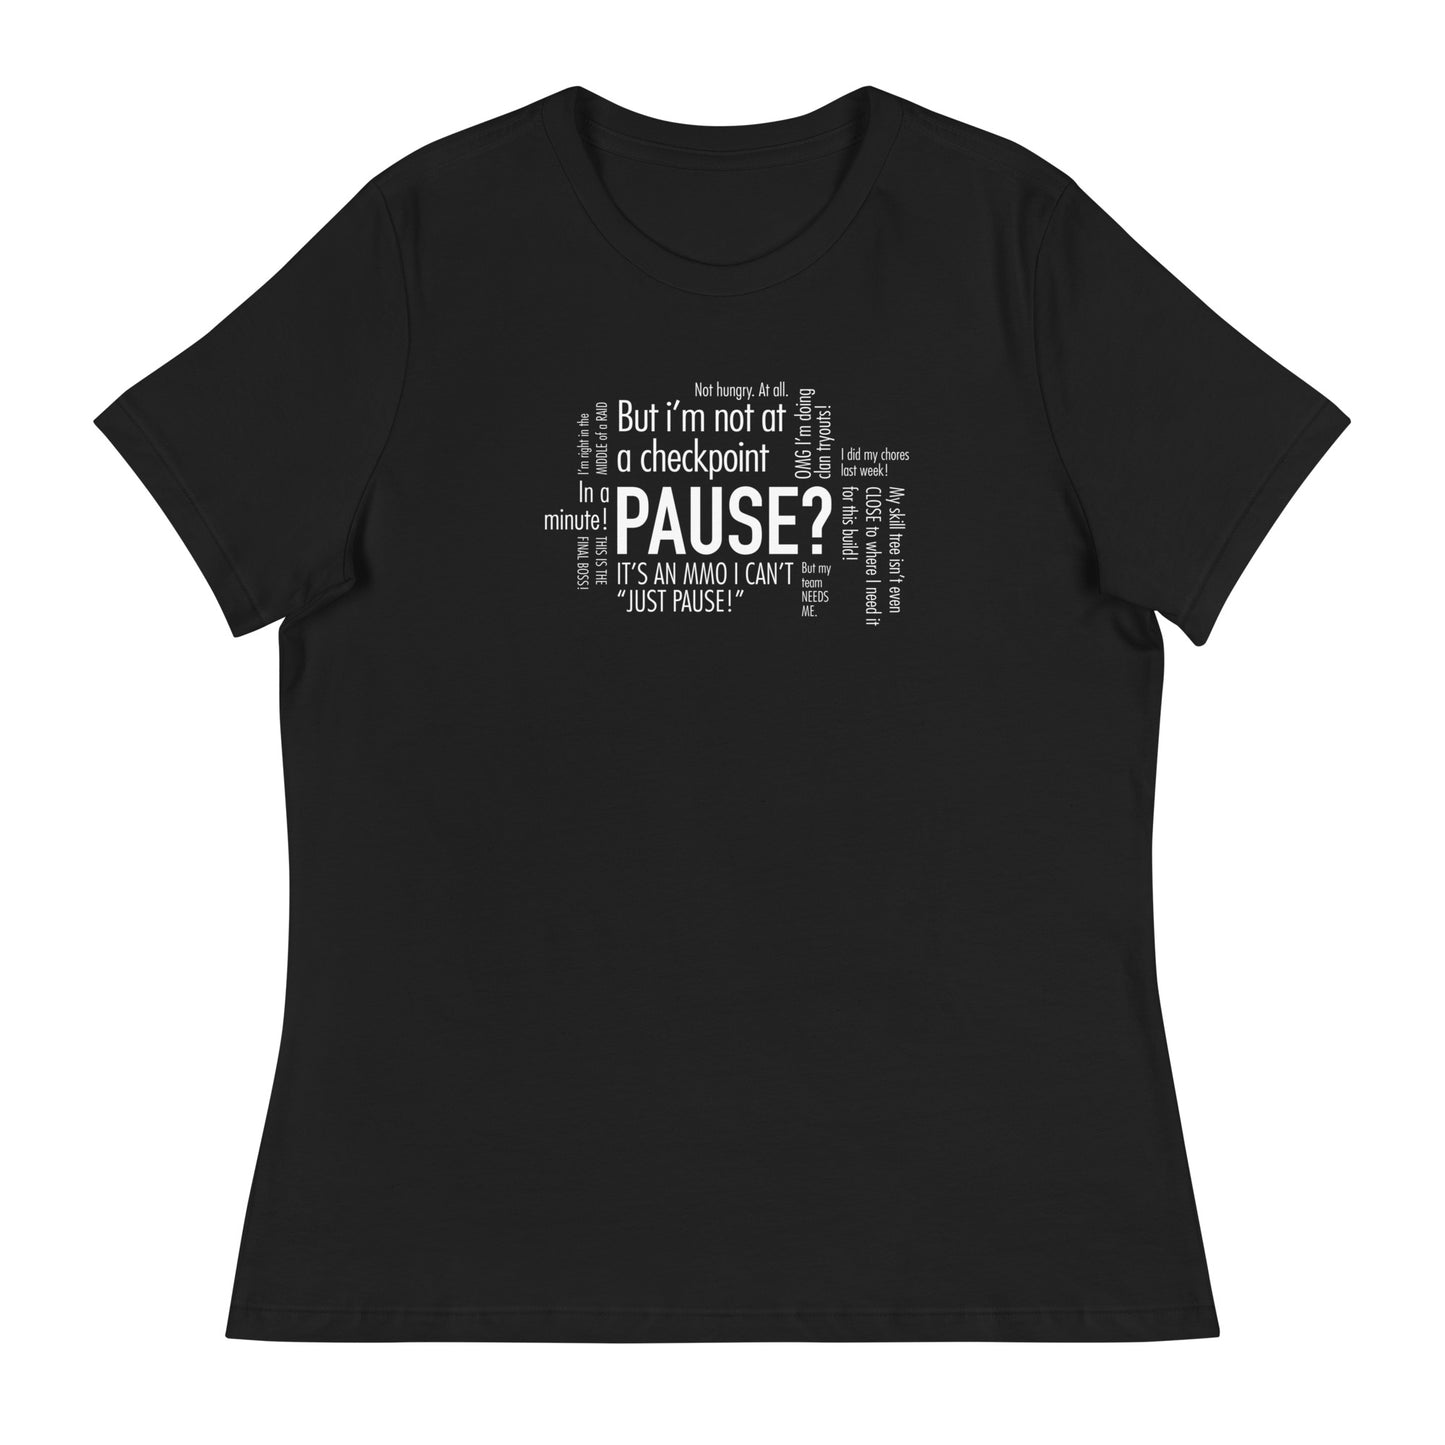 Women's - Pause? Thoughts in my head - Funny T-Shirt